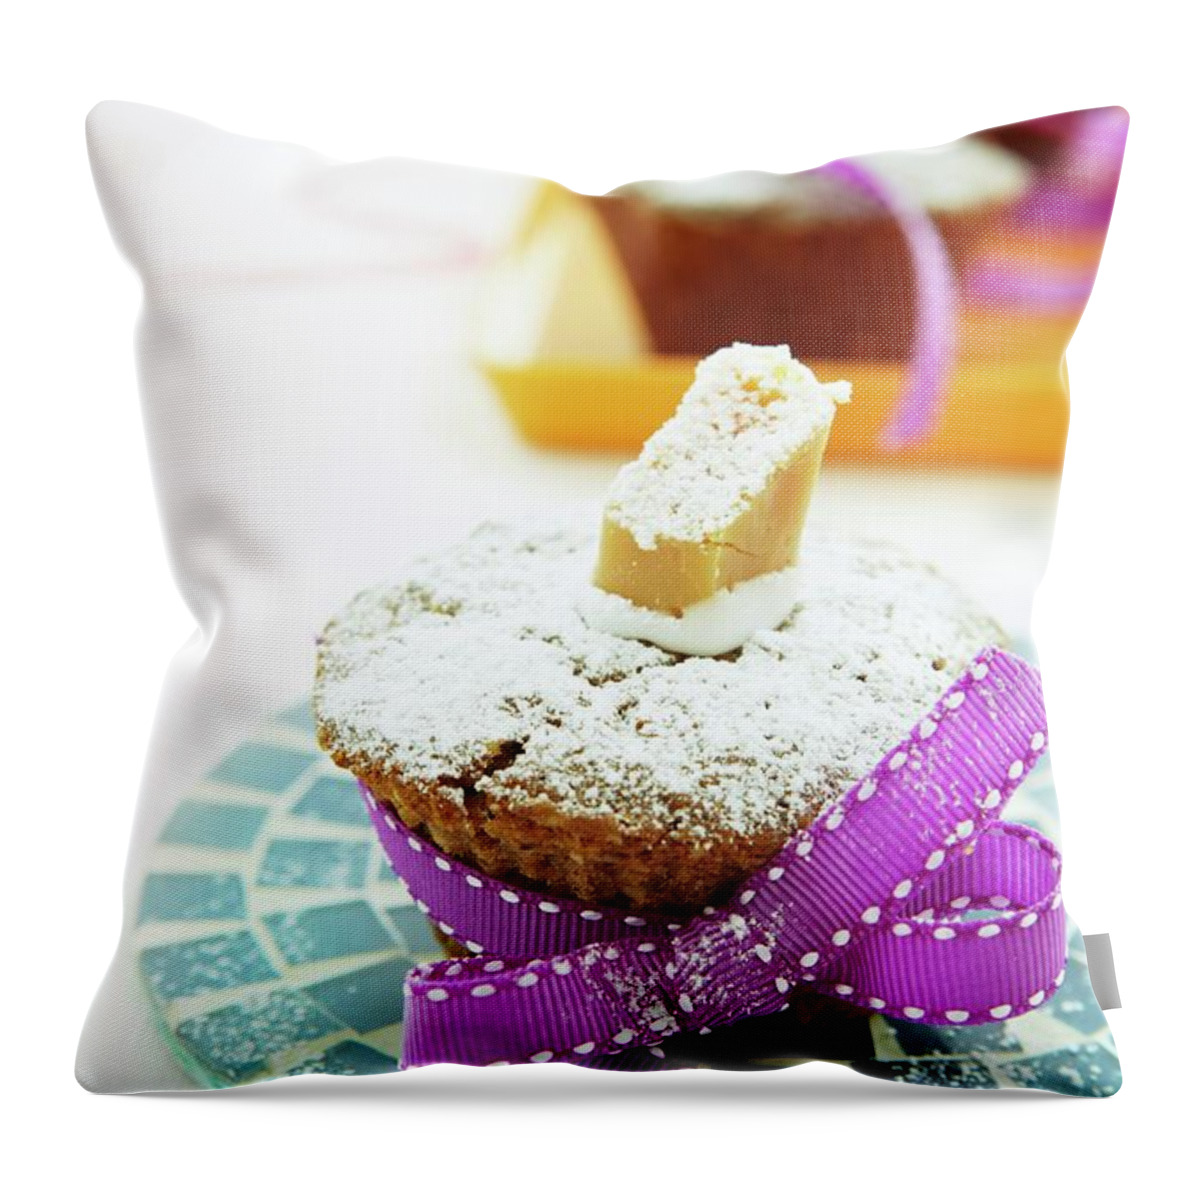 Ip_11200764 Throw Pillow featuring the photograph Hazelnut And Toffee Muffin With Icing Sugar, As A Gift by Kirchherr, Jo